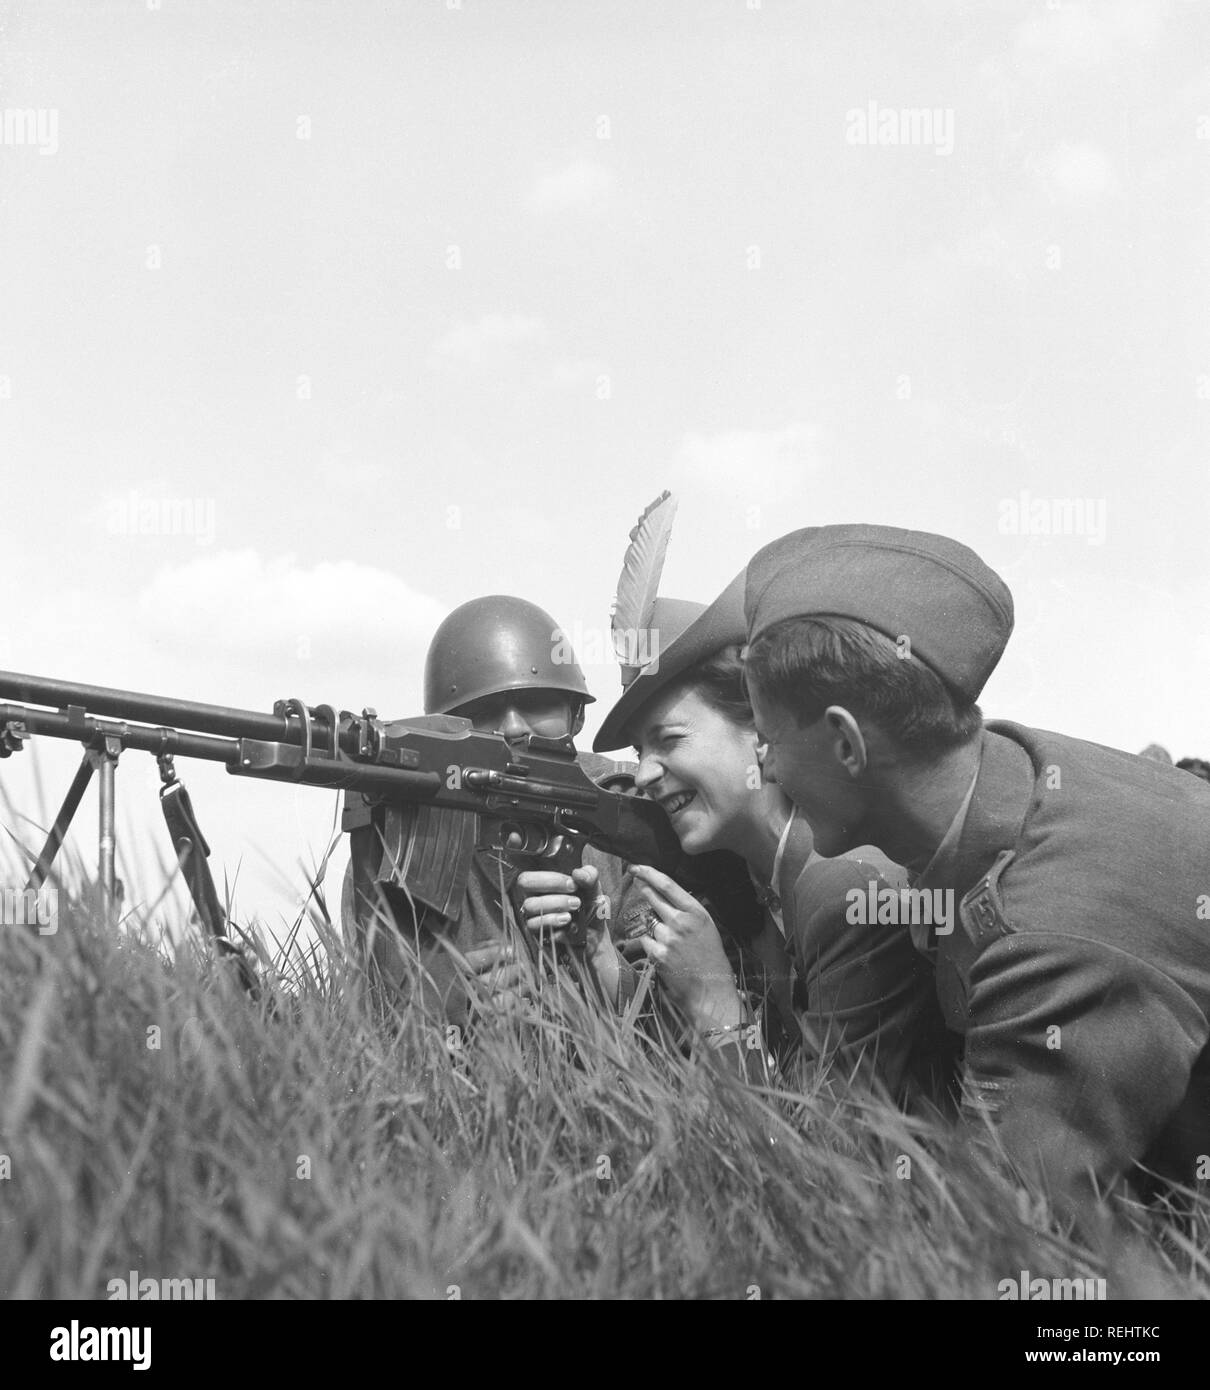 The Regiment's day in the 1940s. A fashionable looking lady is behind a machinegun together with two soldiers. She aims carefully, closing one eye. Sweden 1942 Photo Kristoffersson C20-3 Stock Photo